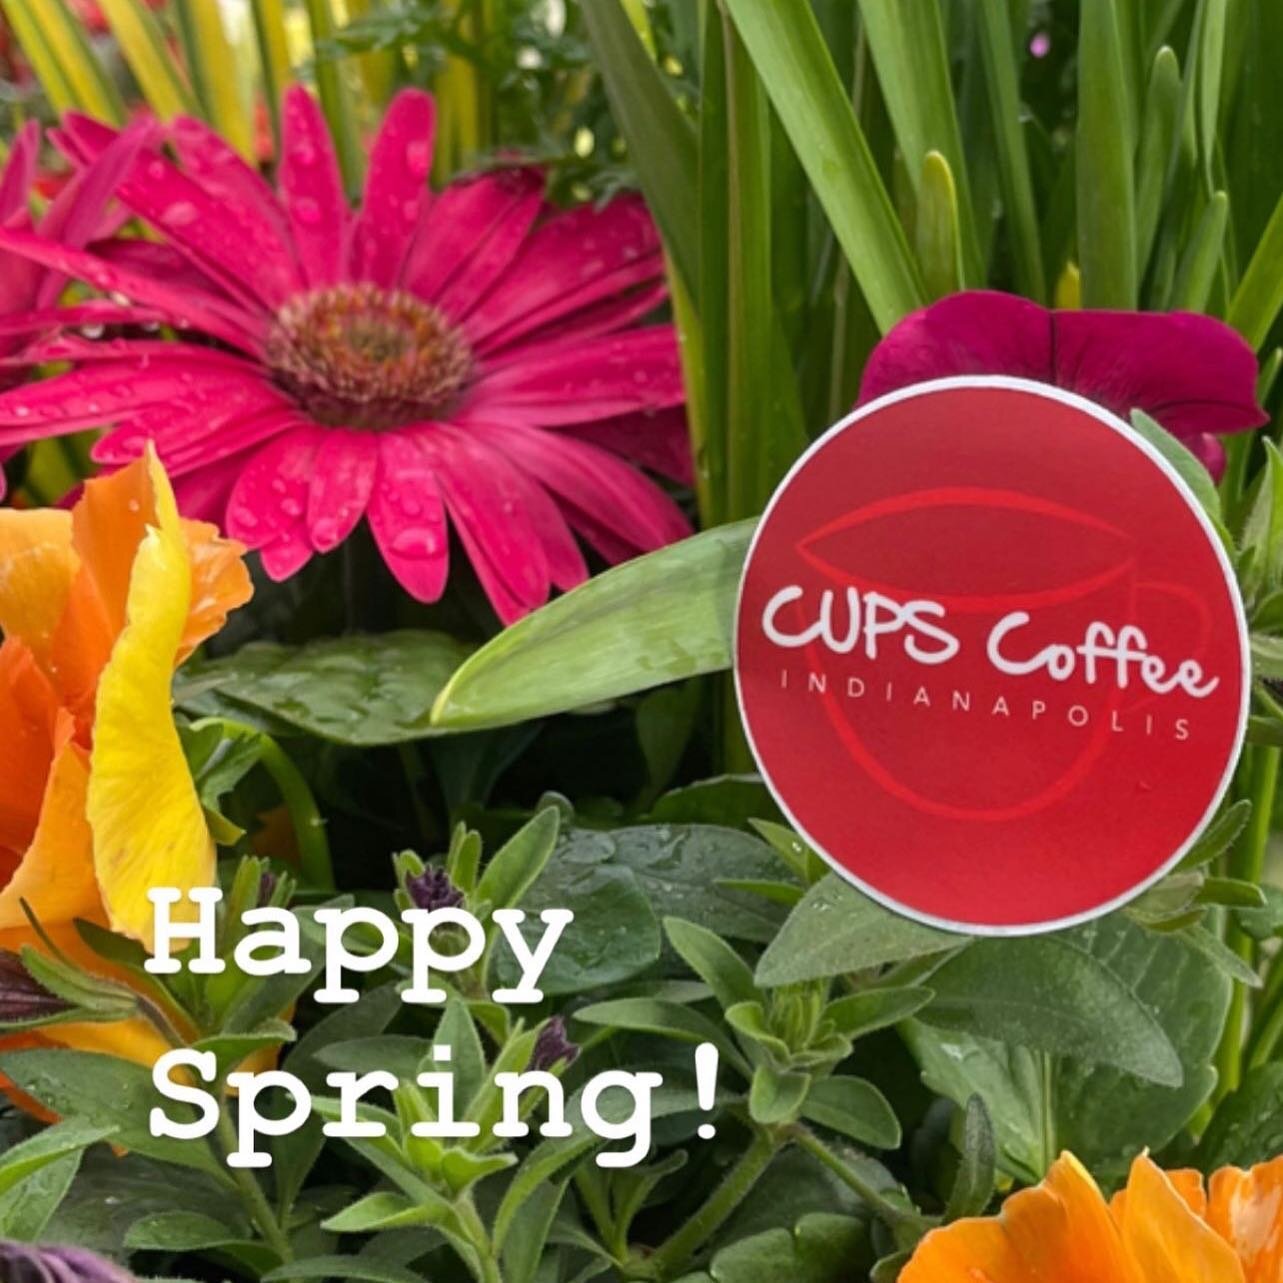 Wishing our CUPStomers near &amp; far a Happy Easter weekend! 

May you have the happiest Easter holiday filled with joy, peace, and so many Easter eggs &amp; coffee of course :) 🐣🐇🌷☕